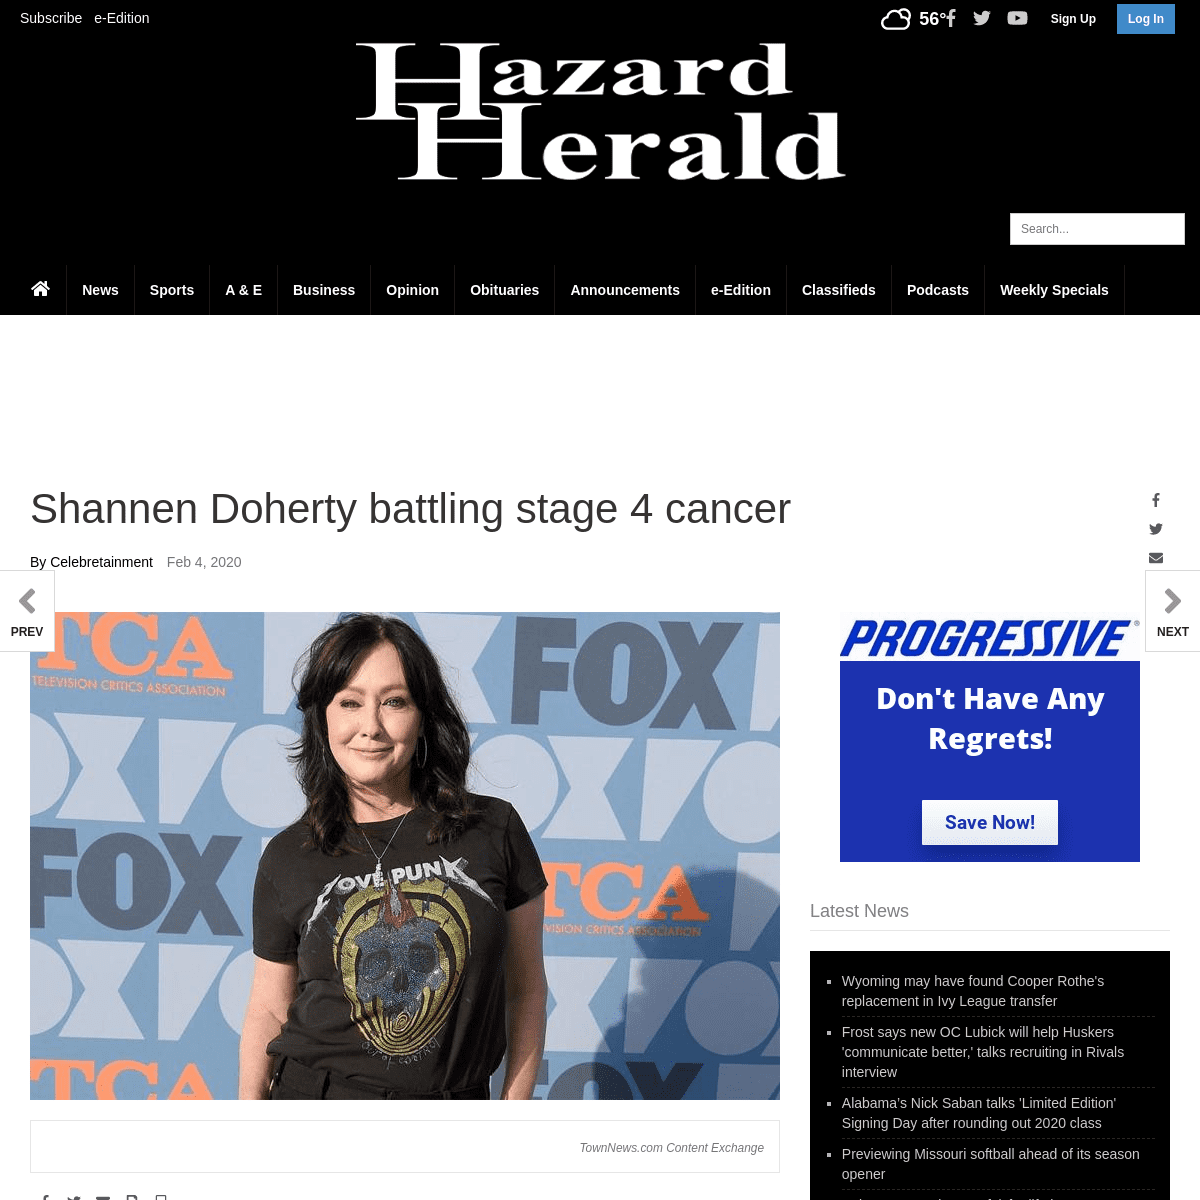 A complete backup of www.hazard-herald.com/lifestyles/entertainment/shannen-doherty-battling-stage-cancer/article_ee73f373-fef4-